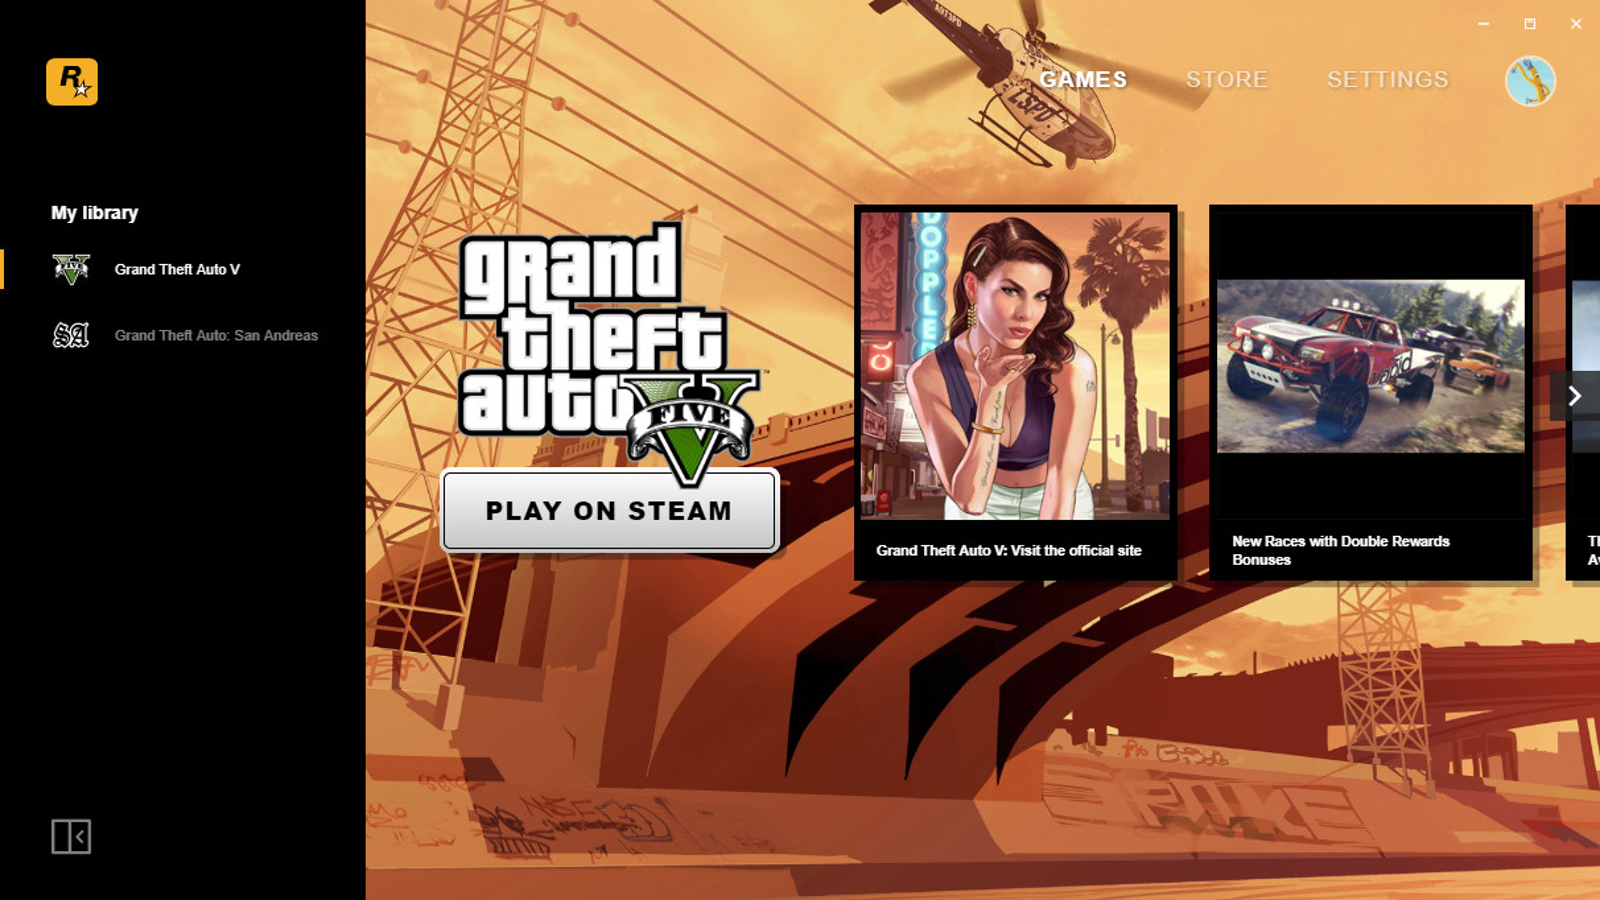 Grand Theft Auto V free for PC thanks to Epic Games 